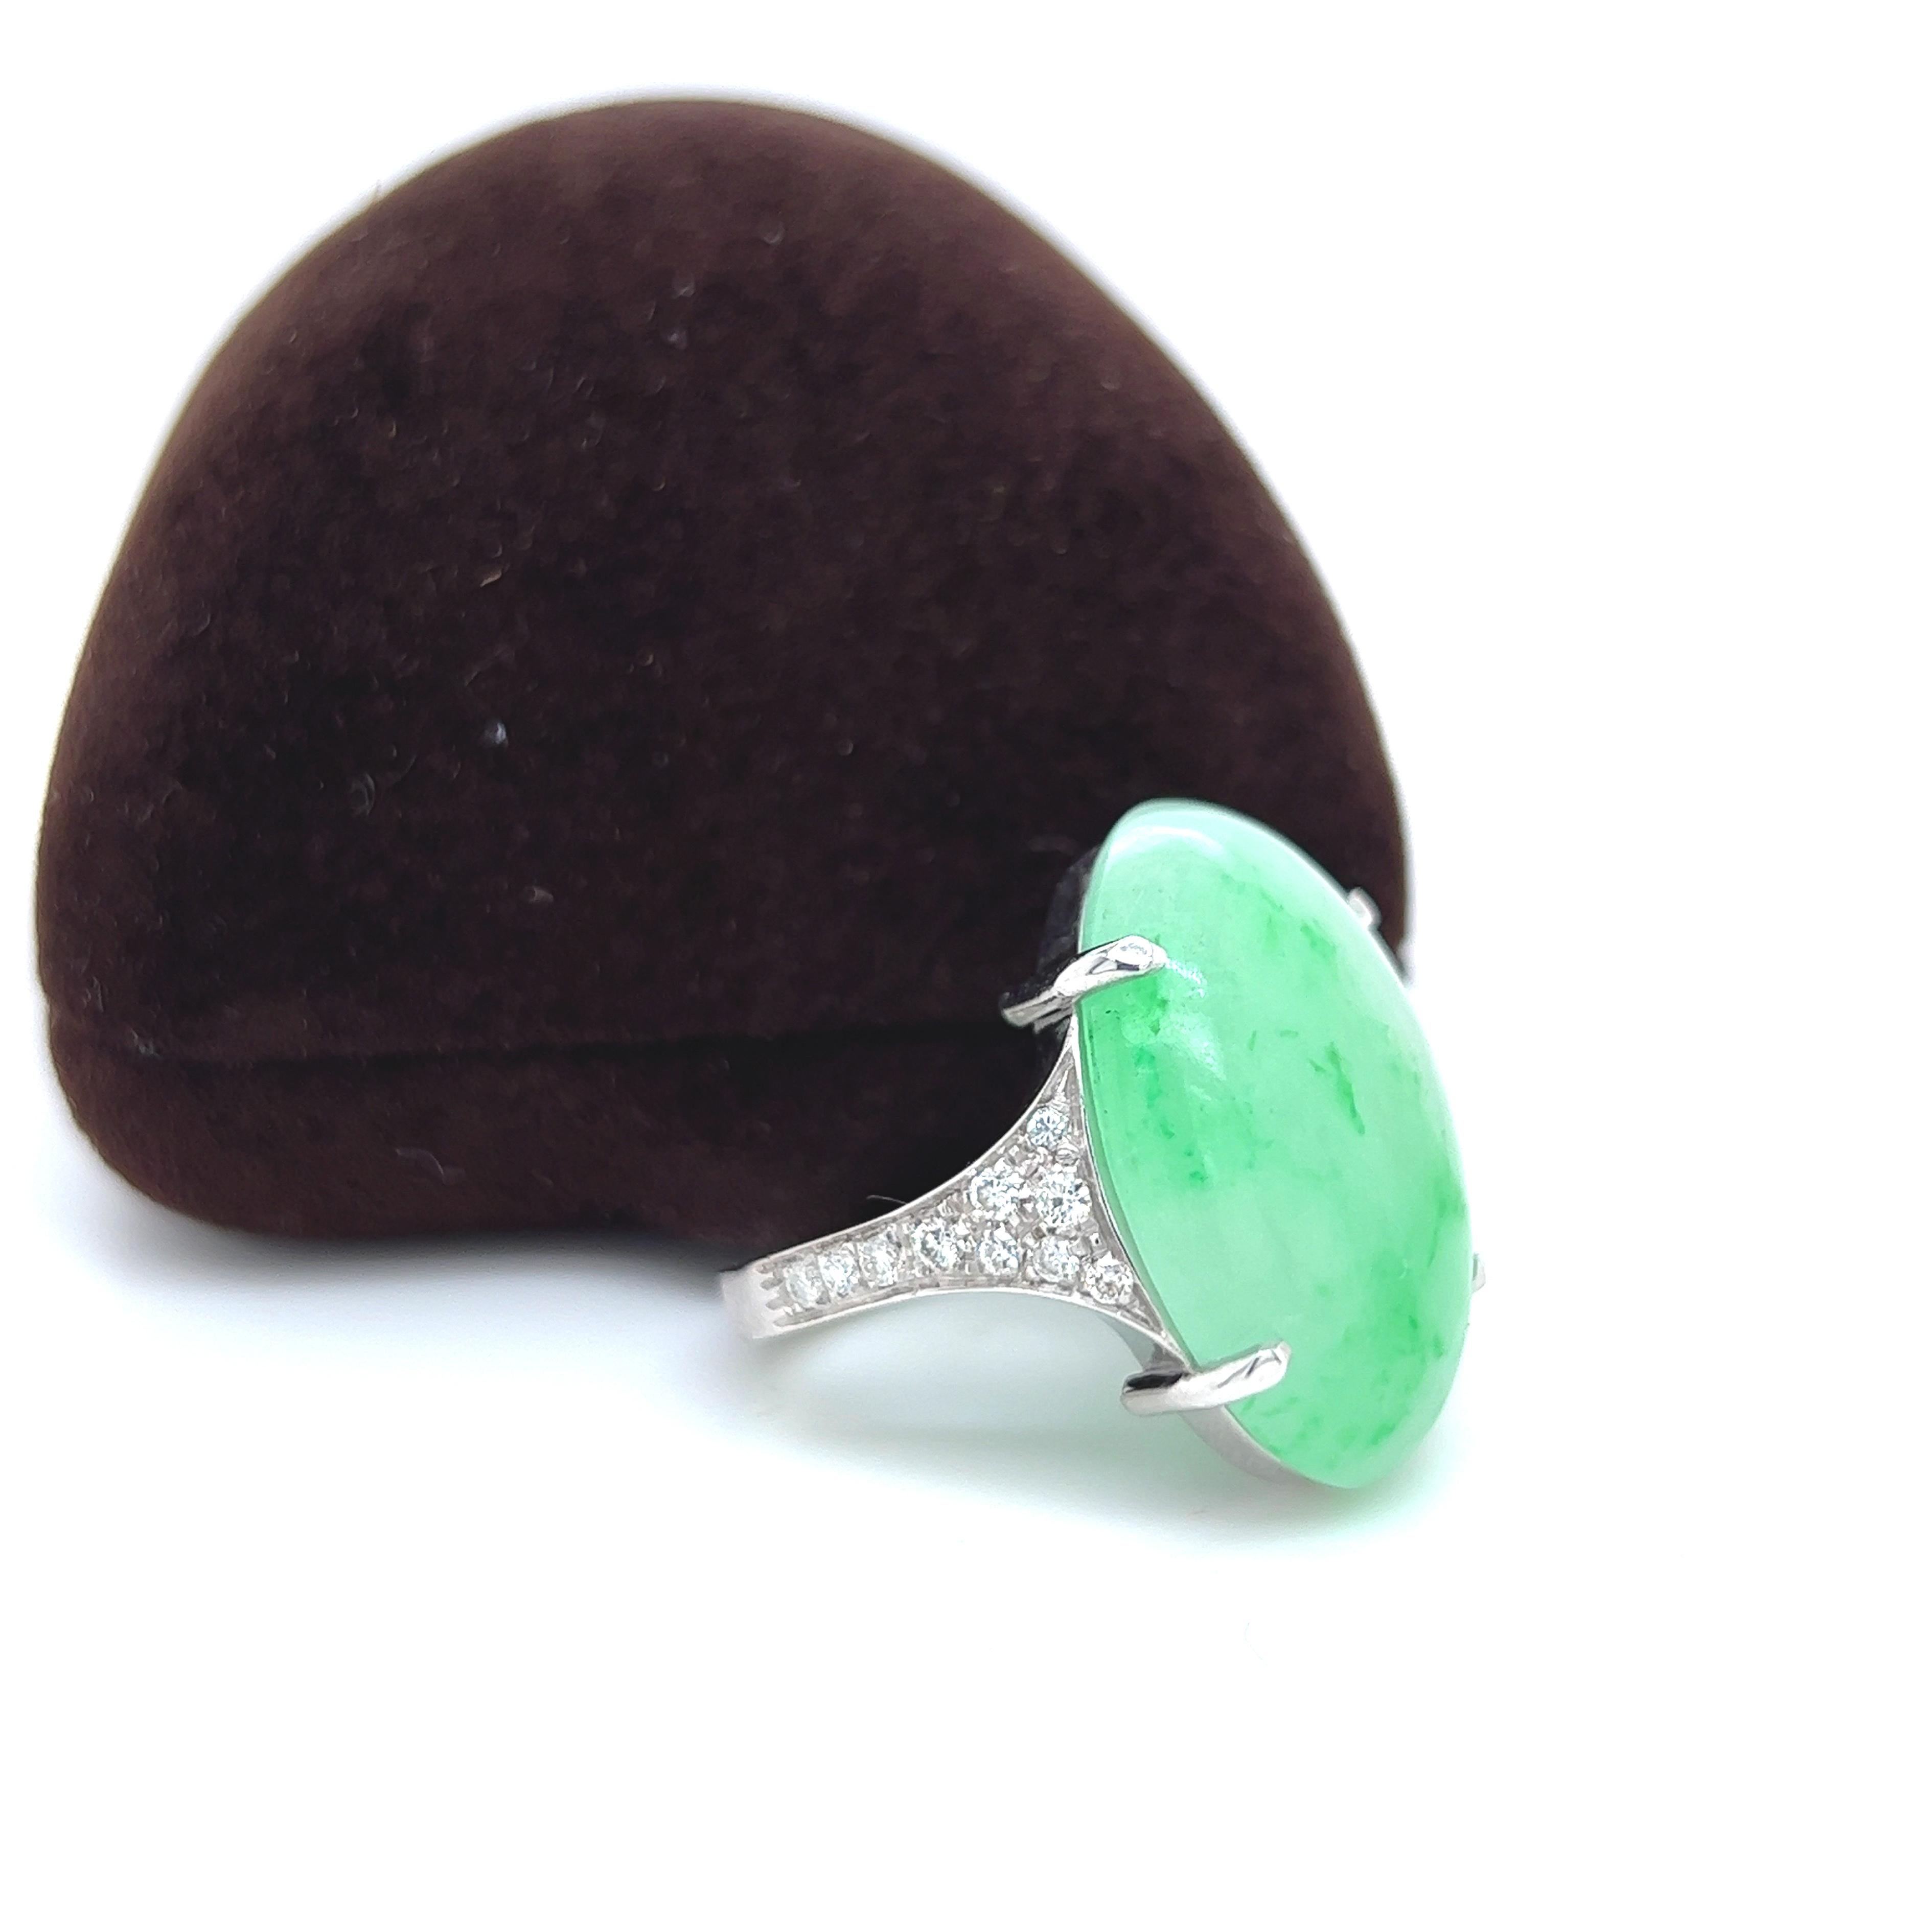 One-of-a-kind, Contemporary, Unique yet Chic Cocktail Ring Featuring a 23.30 Carat Natural Green Jade Cabochon (0.916x0.704in) in a 0.51Kt Top Quality White Diamond Setting.
The color-changing of the Green Jade's cabochon combined with White Diamond